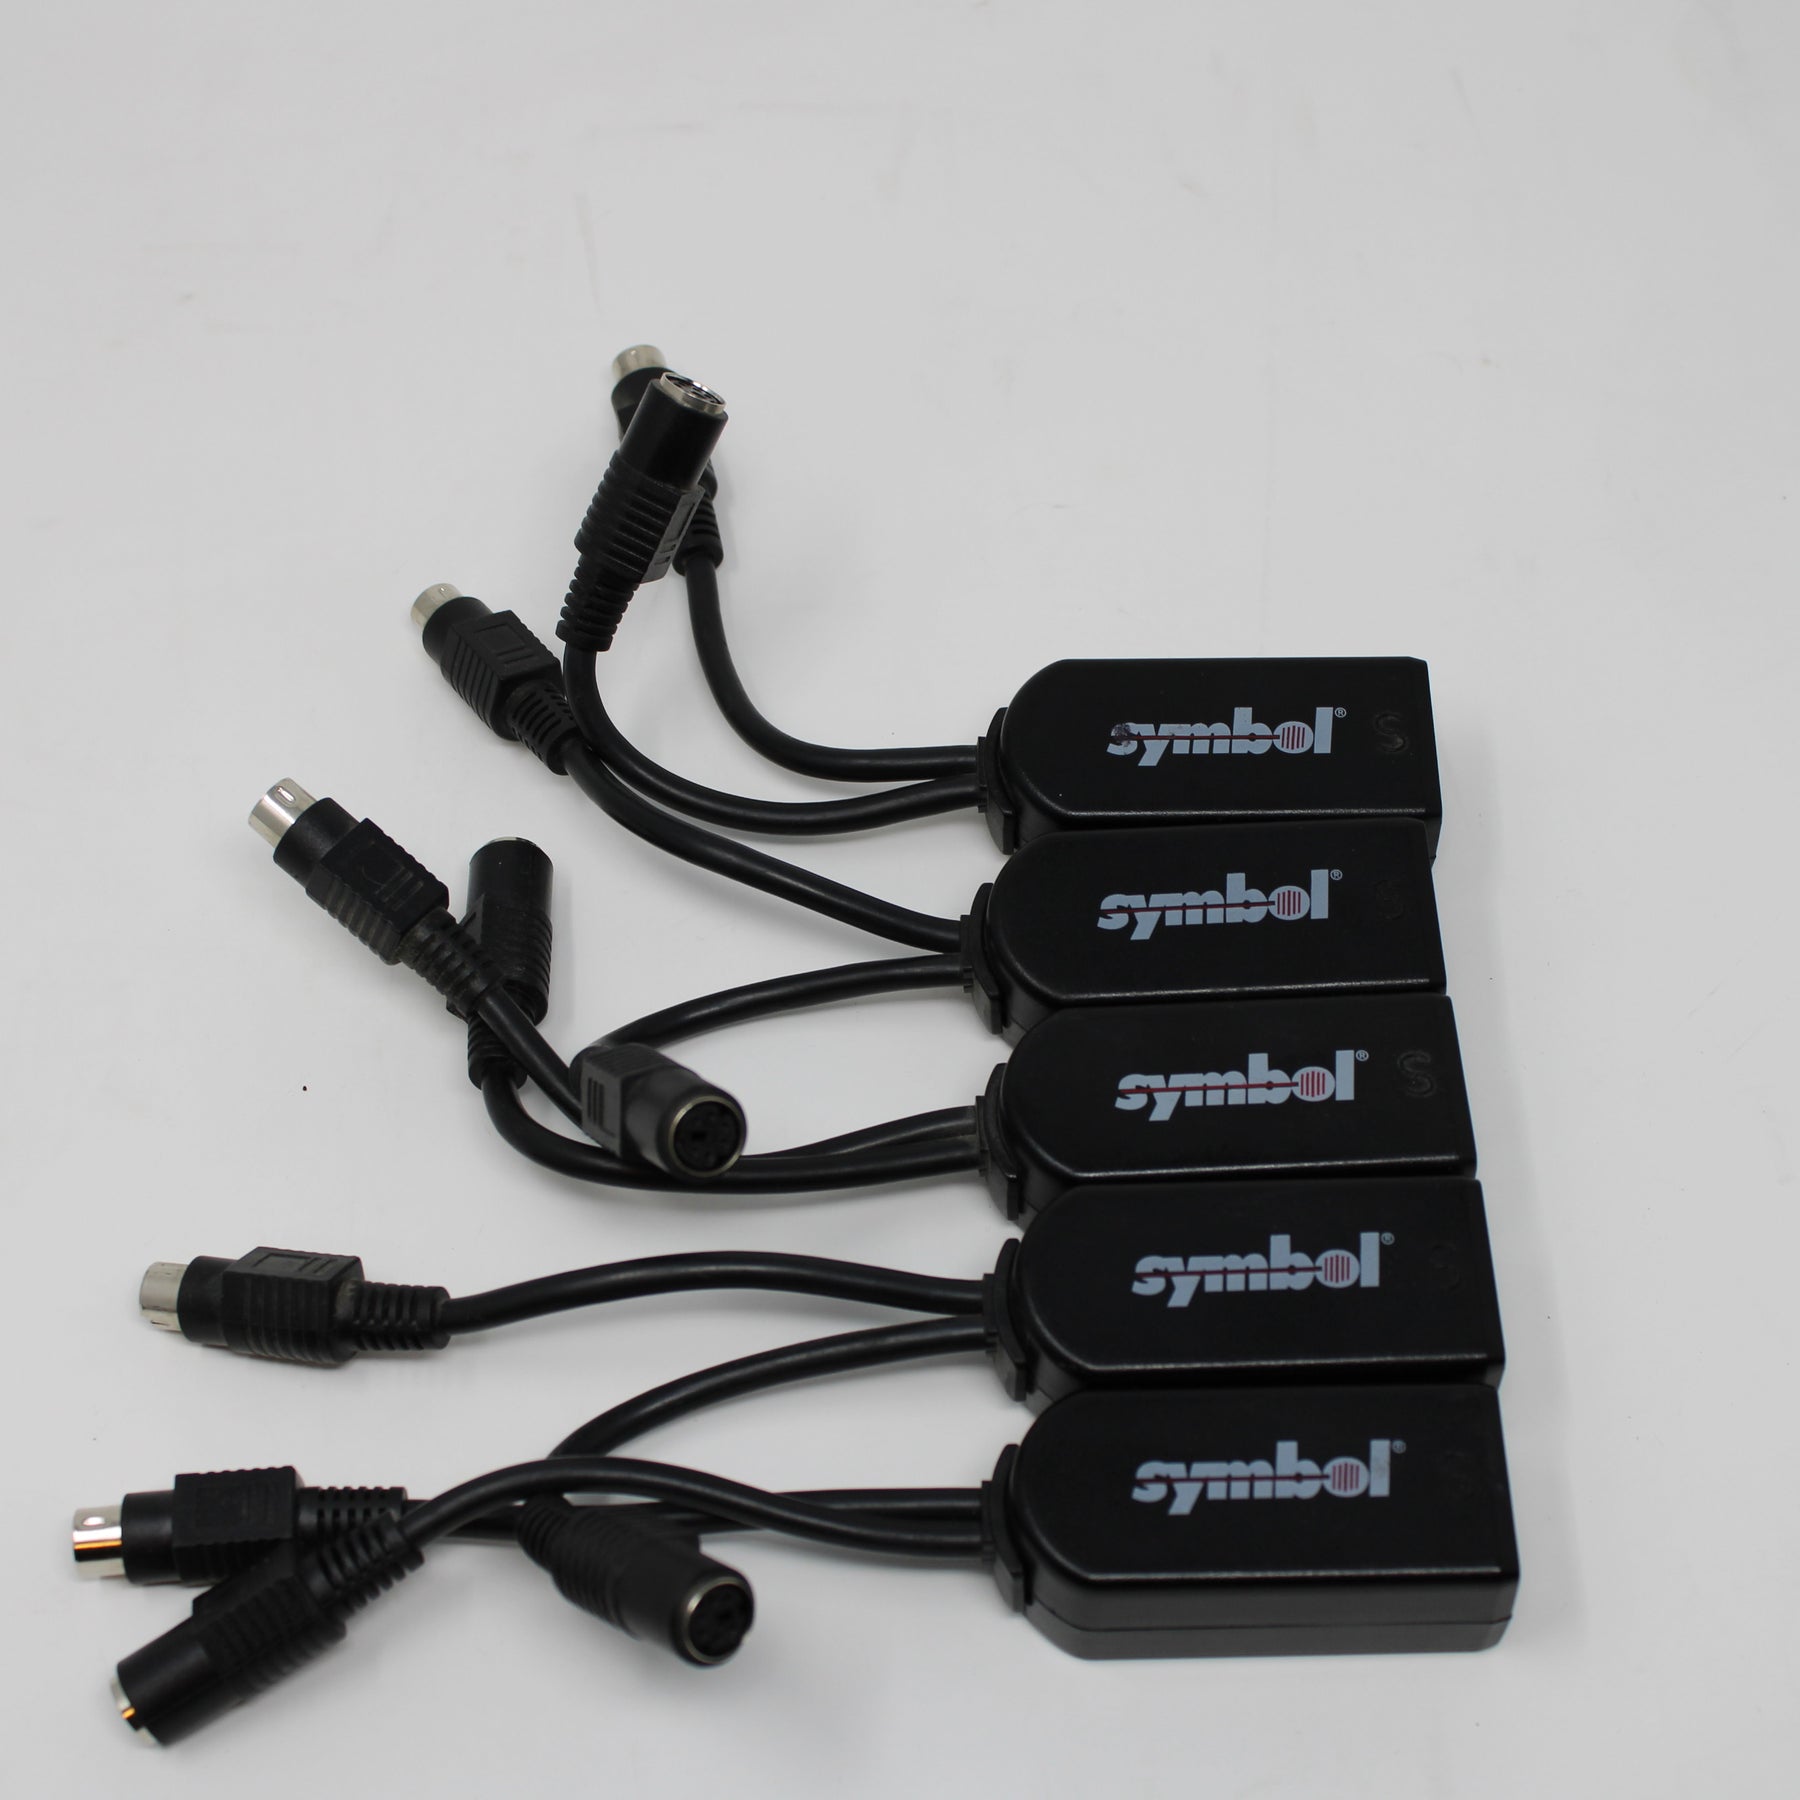 Lot of (5) Symbol Synapse Smart Adapter Cables STI80-0200 For PC Wedge PS/2 Scanners